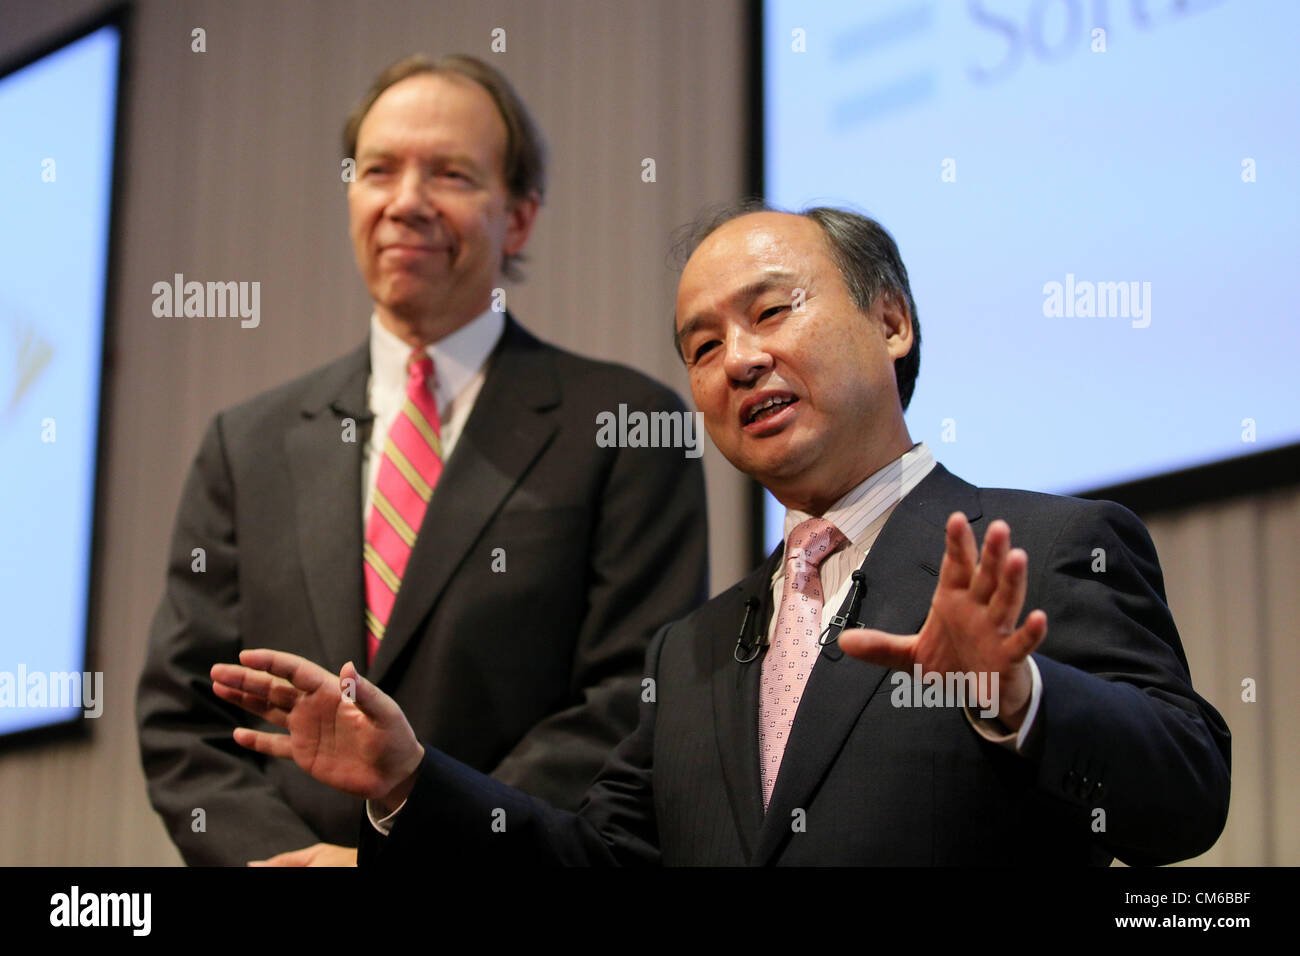 October 15, 2012, Tokyo, Japan - Softbank Corp. President Masayoshi Son (R) speaks to the media at the end of their media conference in Tokyo on Monday, October 15, 2012. Son announced that Japanese mobile Internet company Softbank has reached a deal to acquire Sprint Nextel Corp., the third-largest mobile carrier in the U.S. for $20 billion. The deal enables Softbank to establish an operating base as one of the largest mobile Internet companies in the world, with combined mobile telecom service revenues that will rank it third amongst global operators. Softbank aims to enhance Sprint's compet Stock Photo